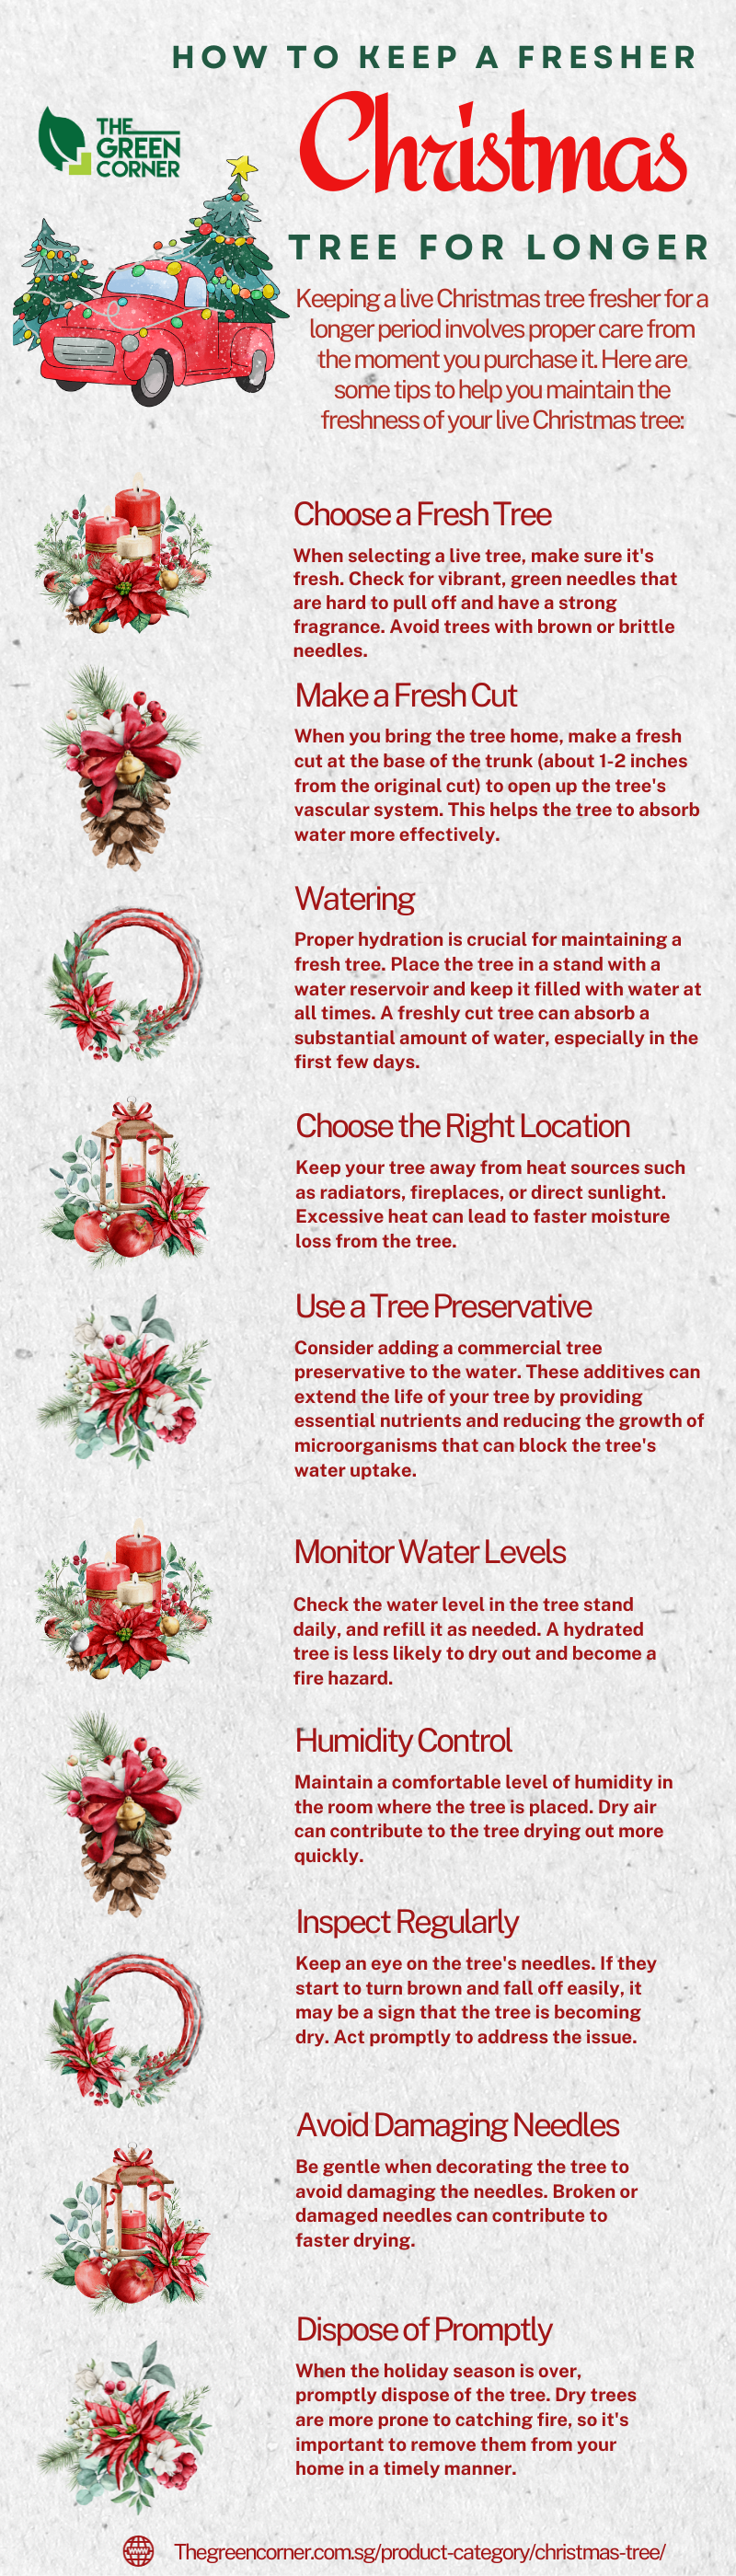 How to Maintain Fresh Christmas Trees in Singapore – The Green Corner